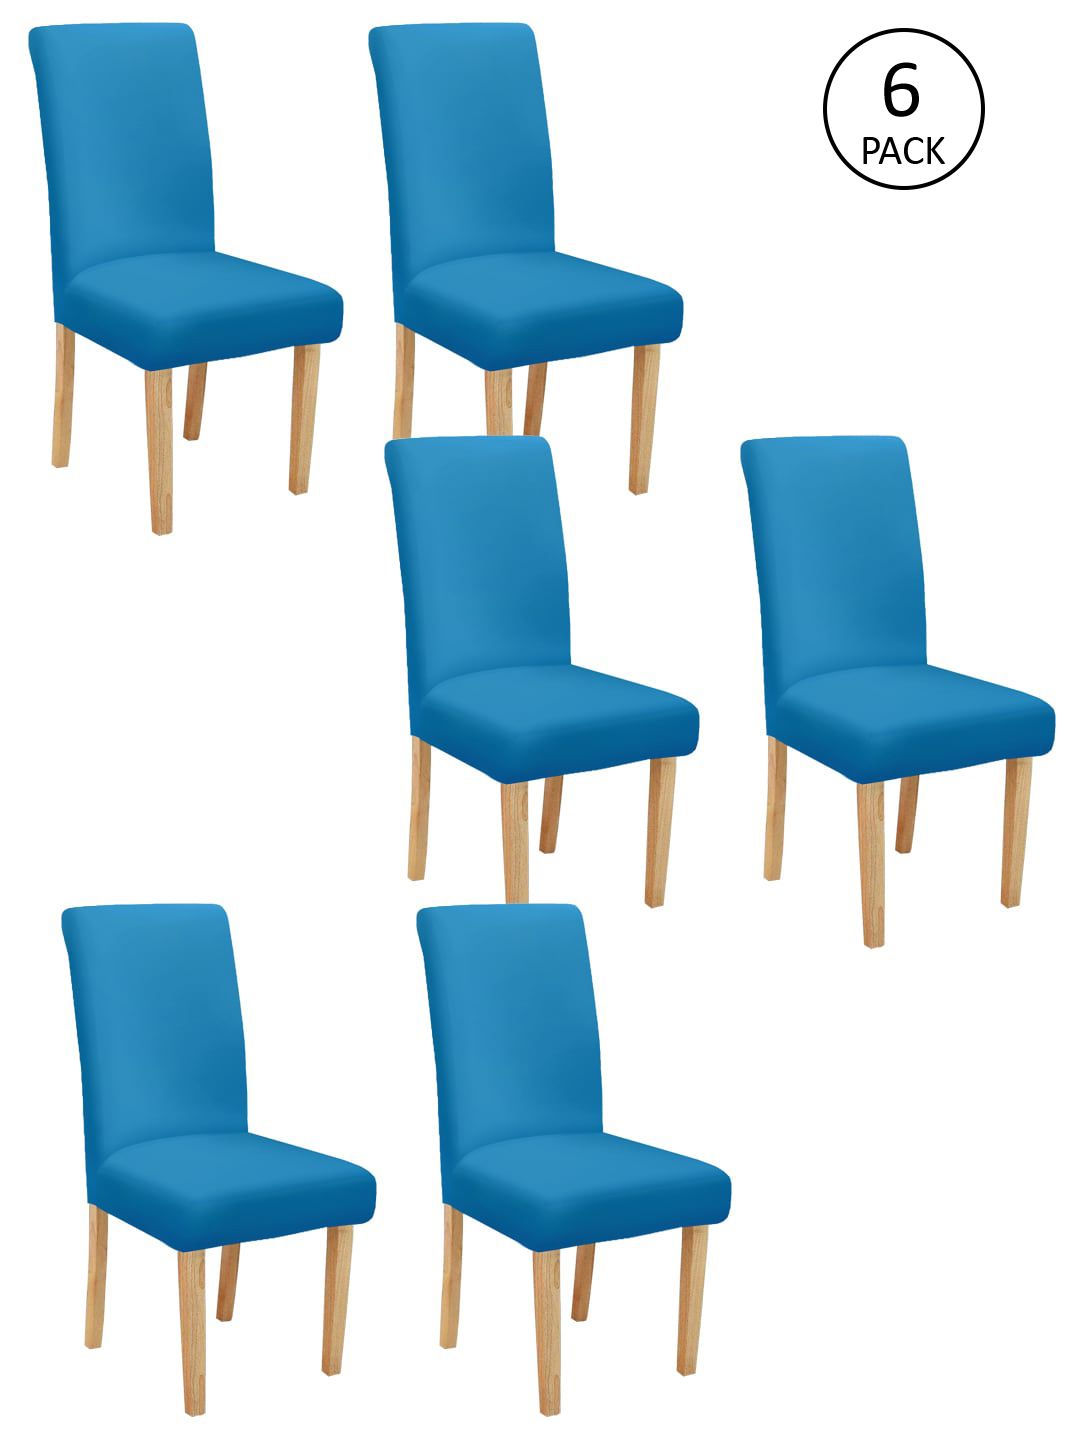 Cortina Set Of 6 Blue Solid Chair Covers Price in India